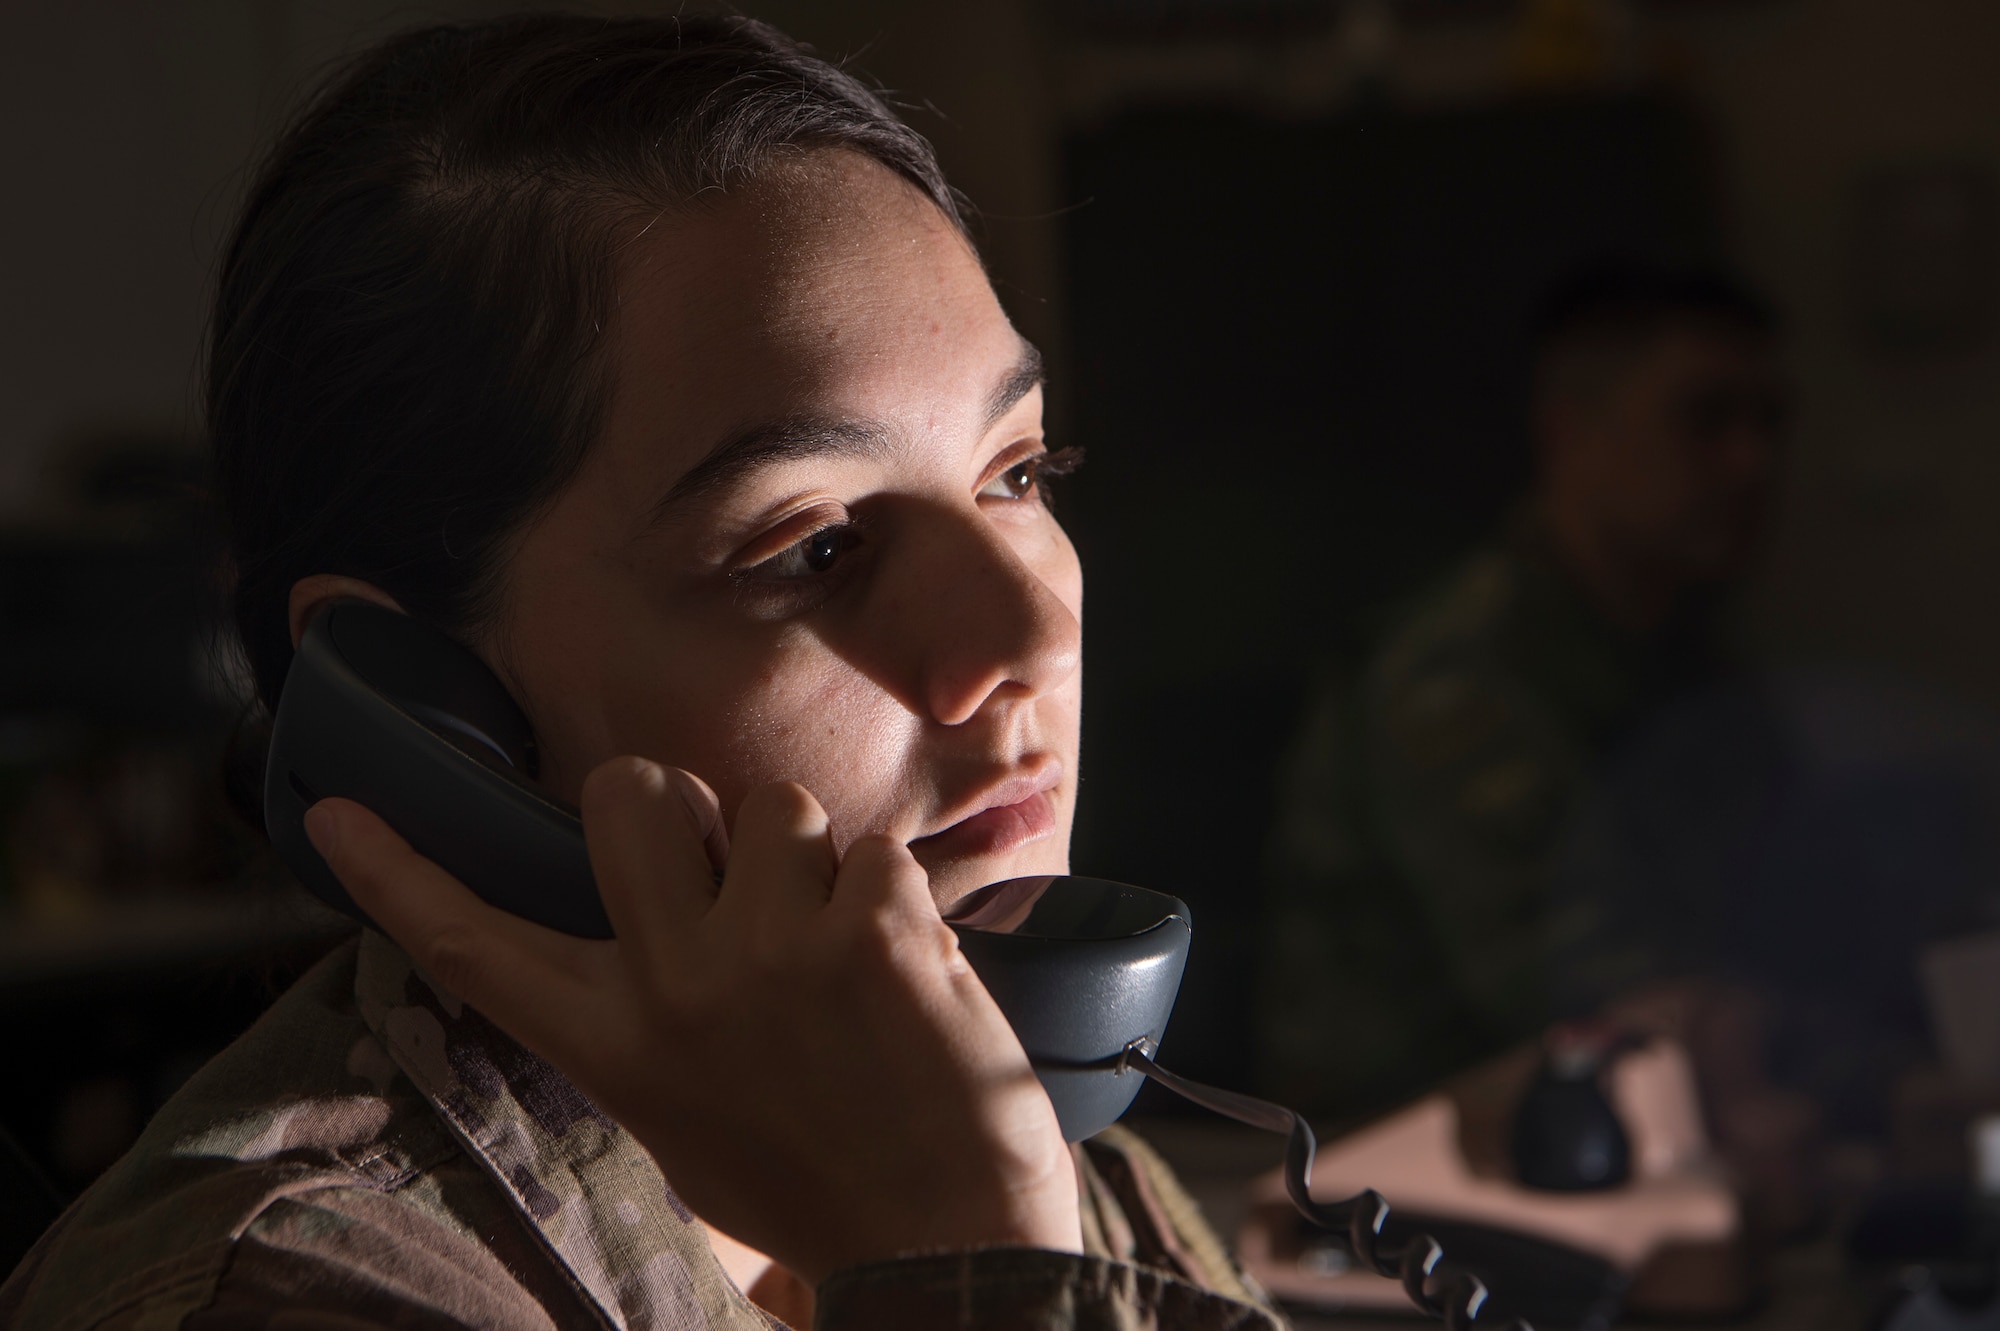 Senior Airman Anelle Orrell, 379th Air Expeditionary Wing command post controller, gathers information for distribution March 18, 2019, at Al Udeid Air Base, Qatar. Airmen from the command post are responsible for gathering and relaying information to entities across base to include aircraft maintenance requirements, security forces incidents, and notifications that ensure the safety of Airmen and other assets on base. (U.S. Air Force photo by Tech. Sgt. Christopher Hubenthal)